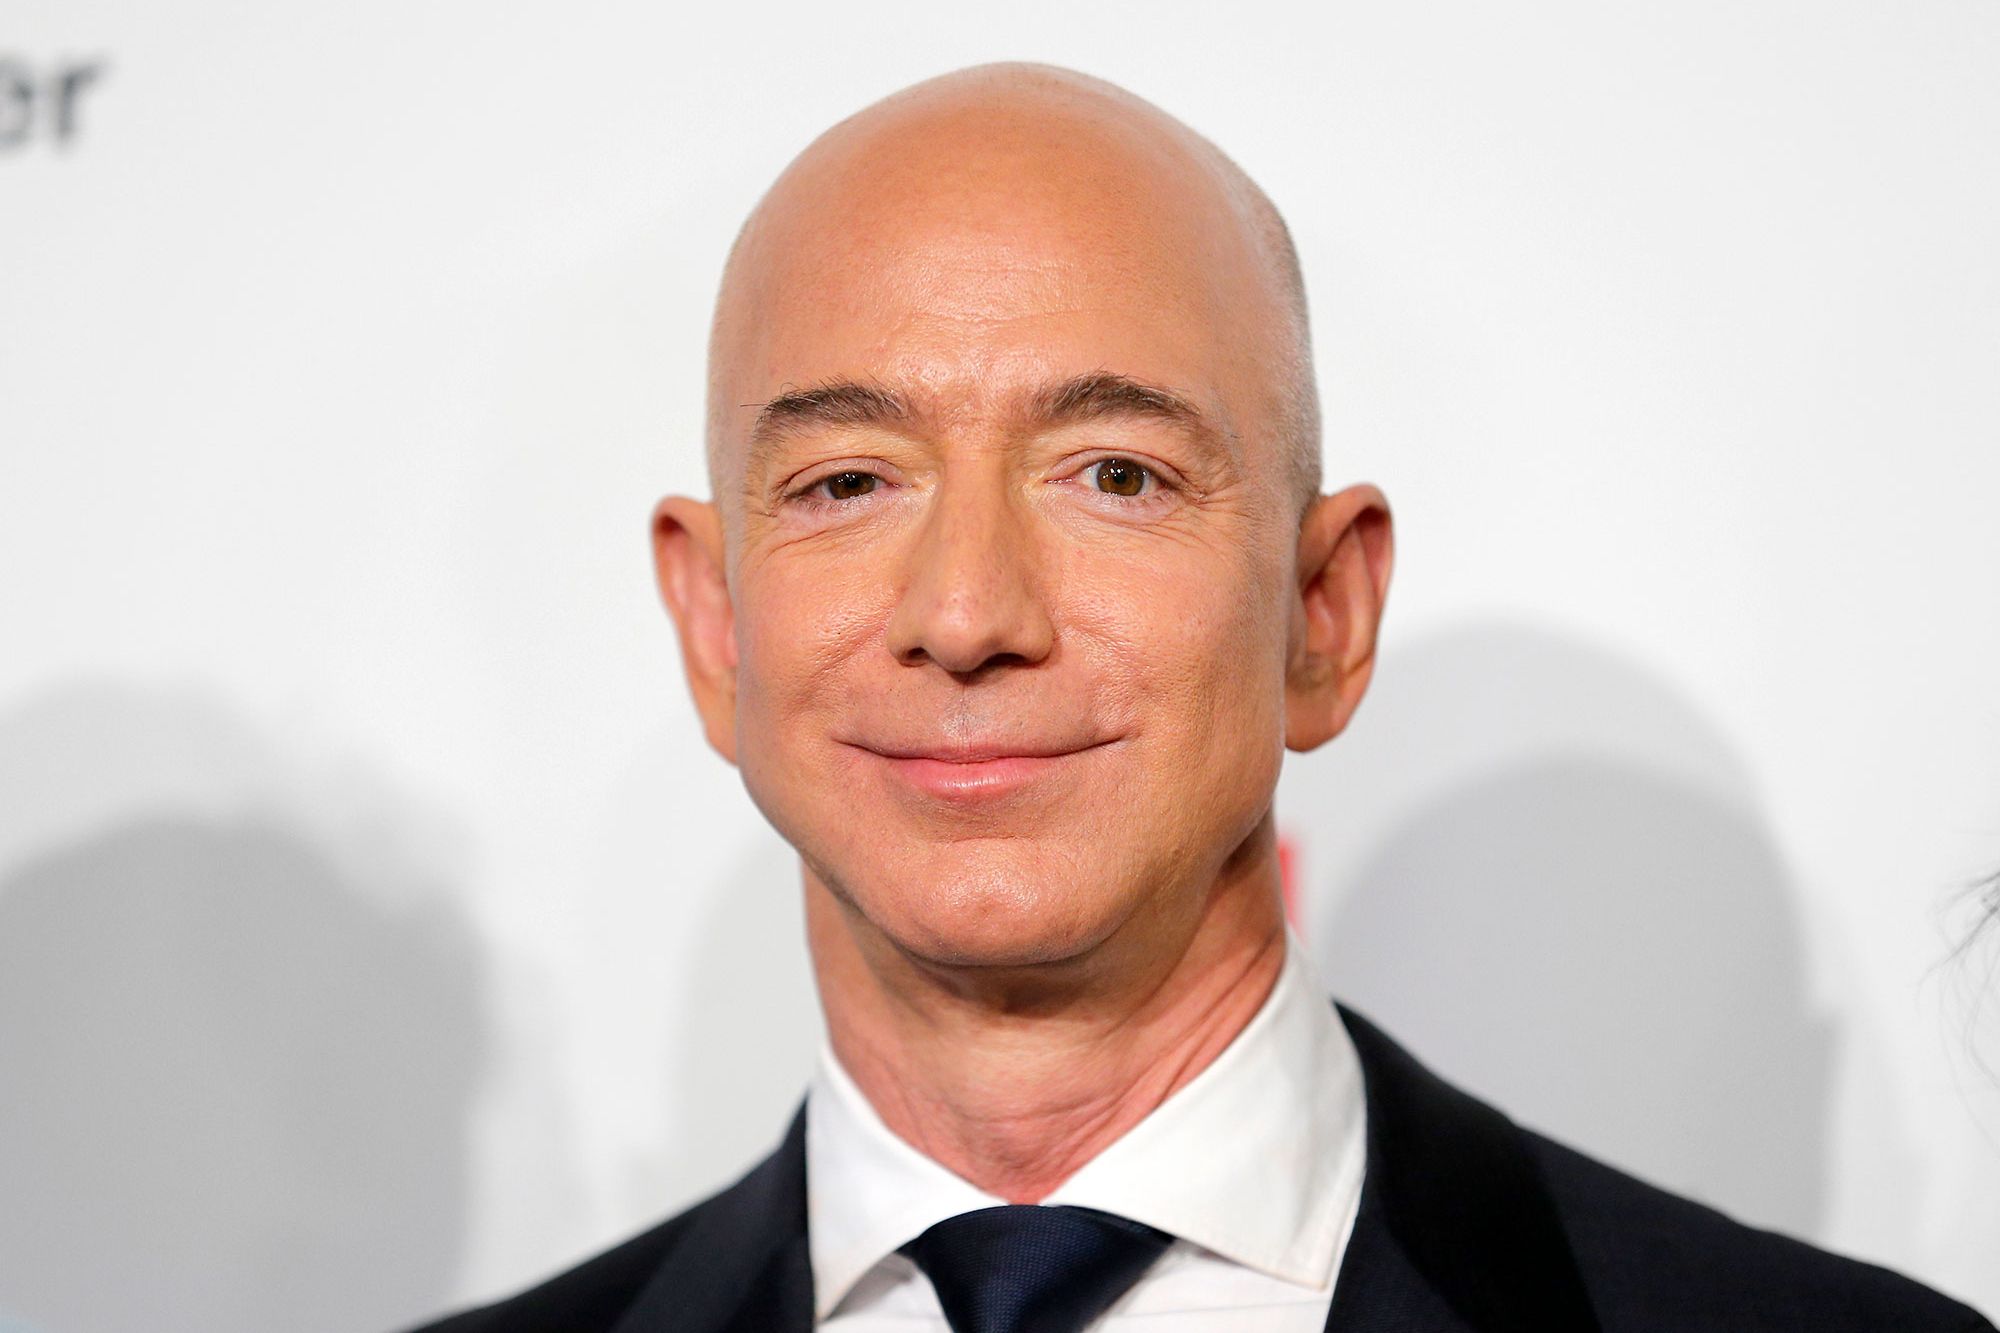 Discover The Success Story Of Jeff Bezos: The Man Behind Amazon's Dominance